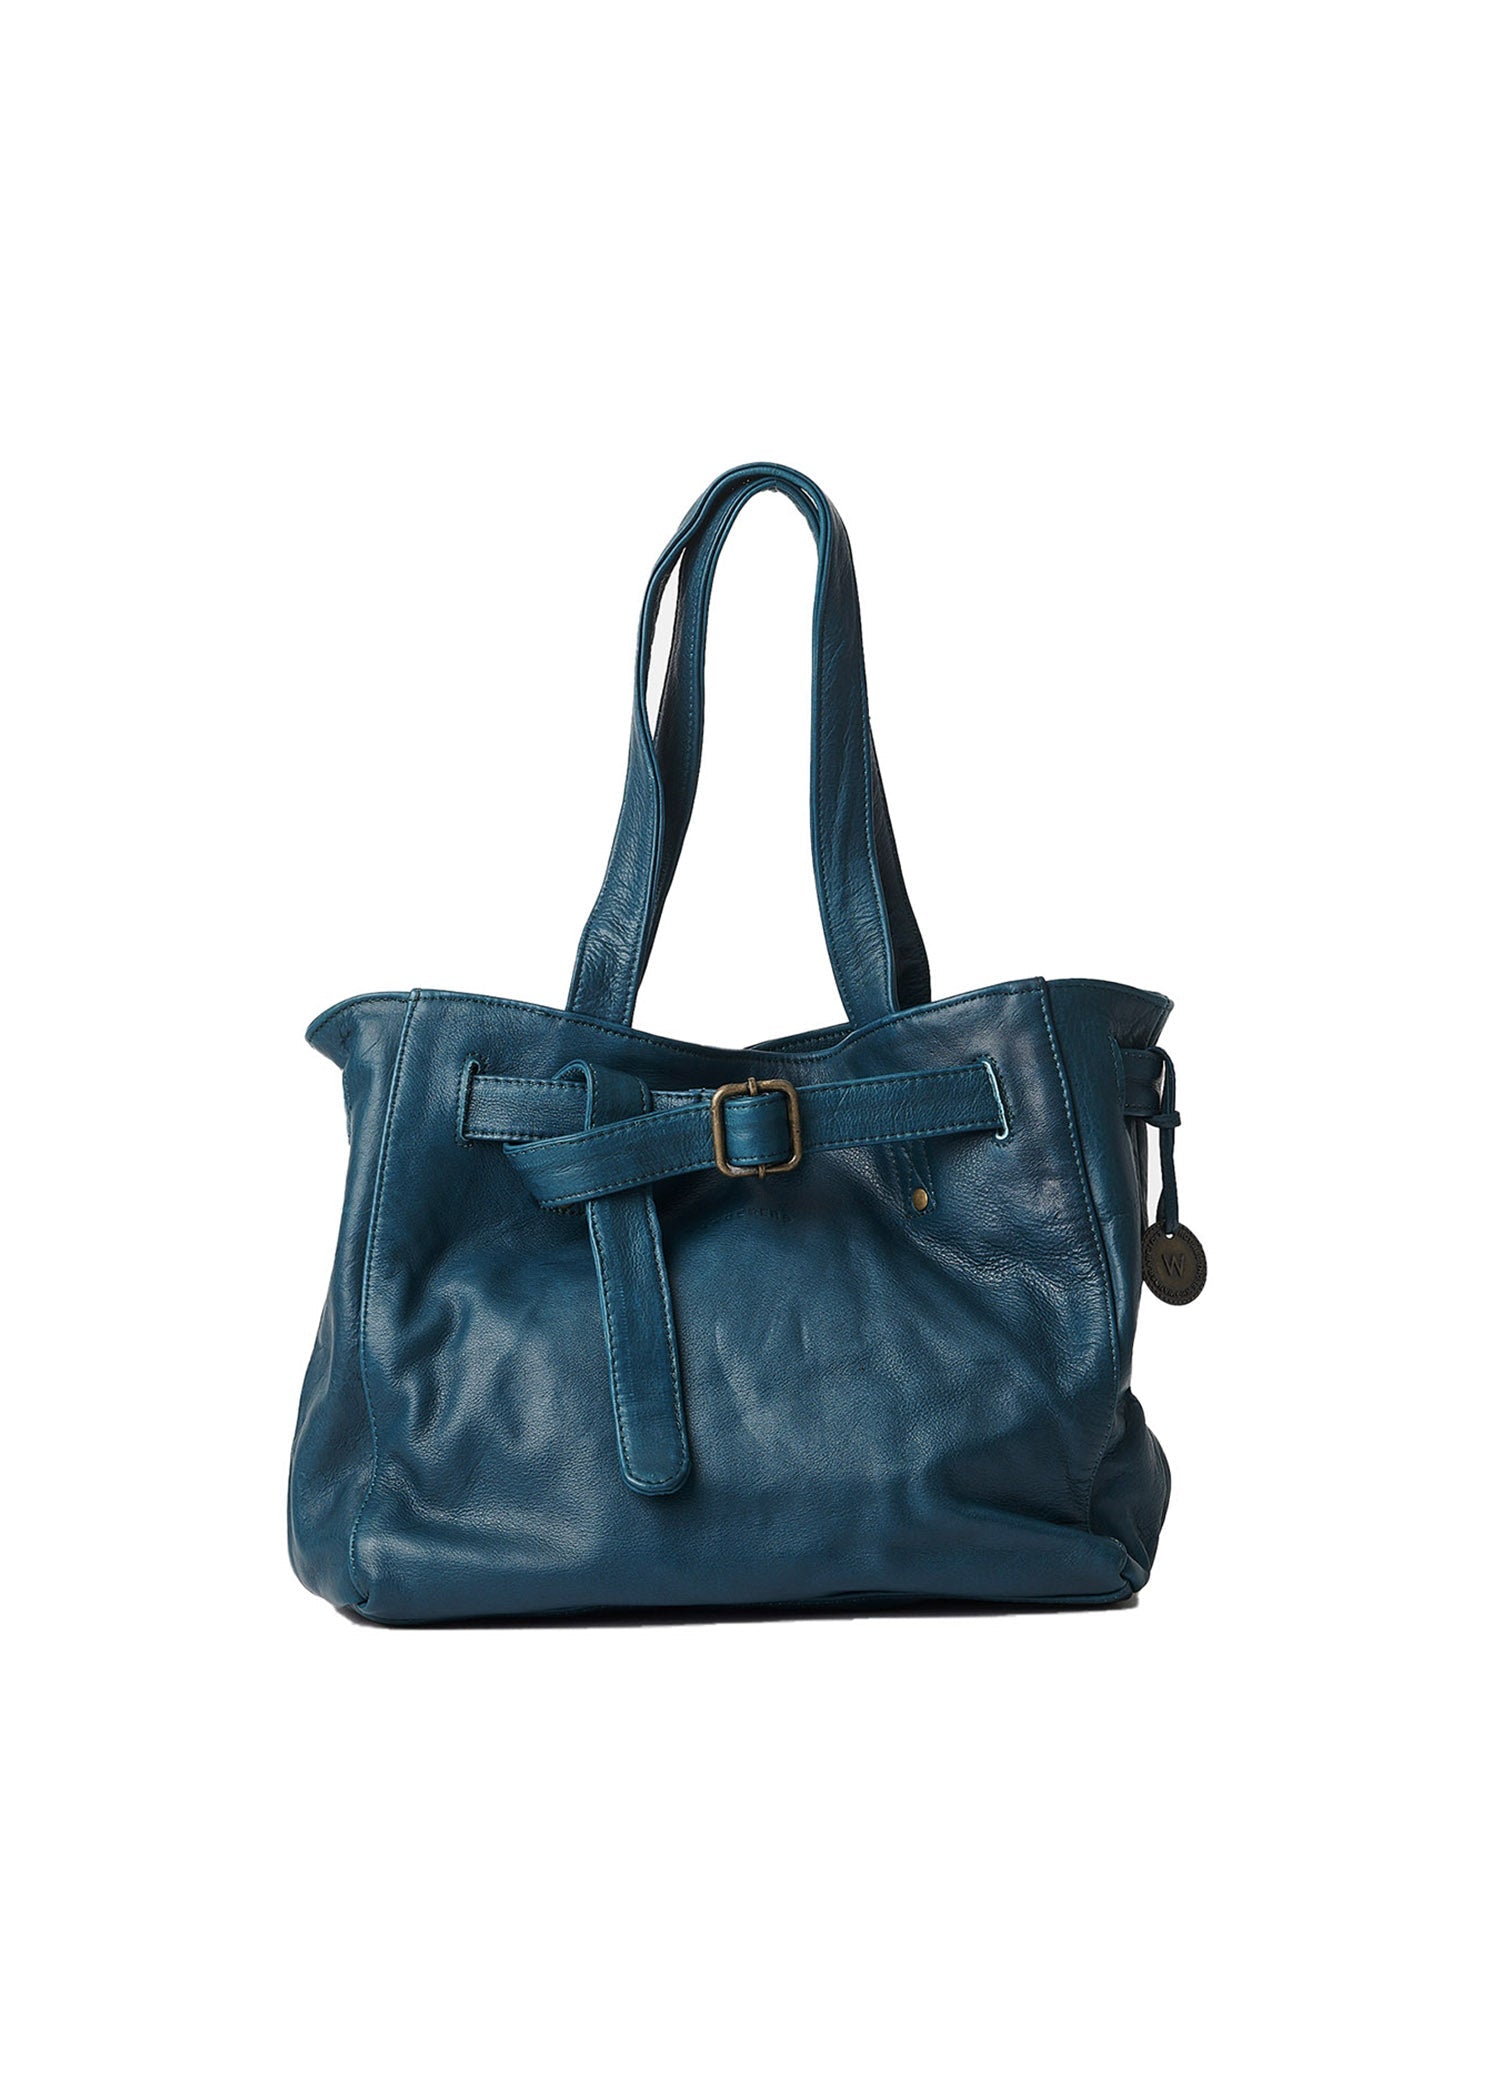 Sydney Large Tote - SHB2816794 - Fossil